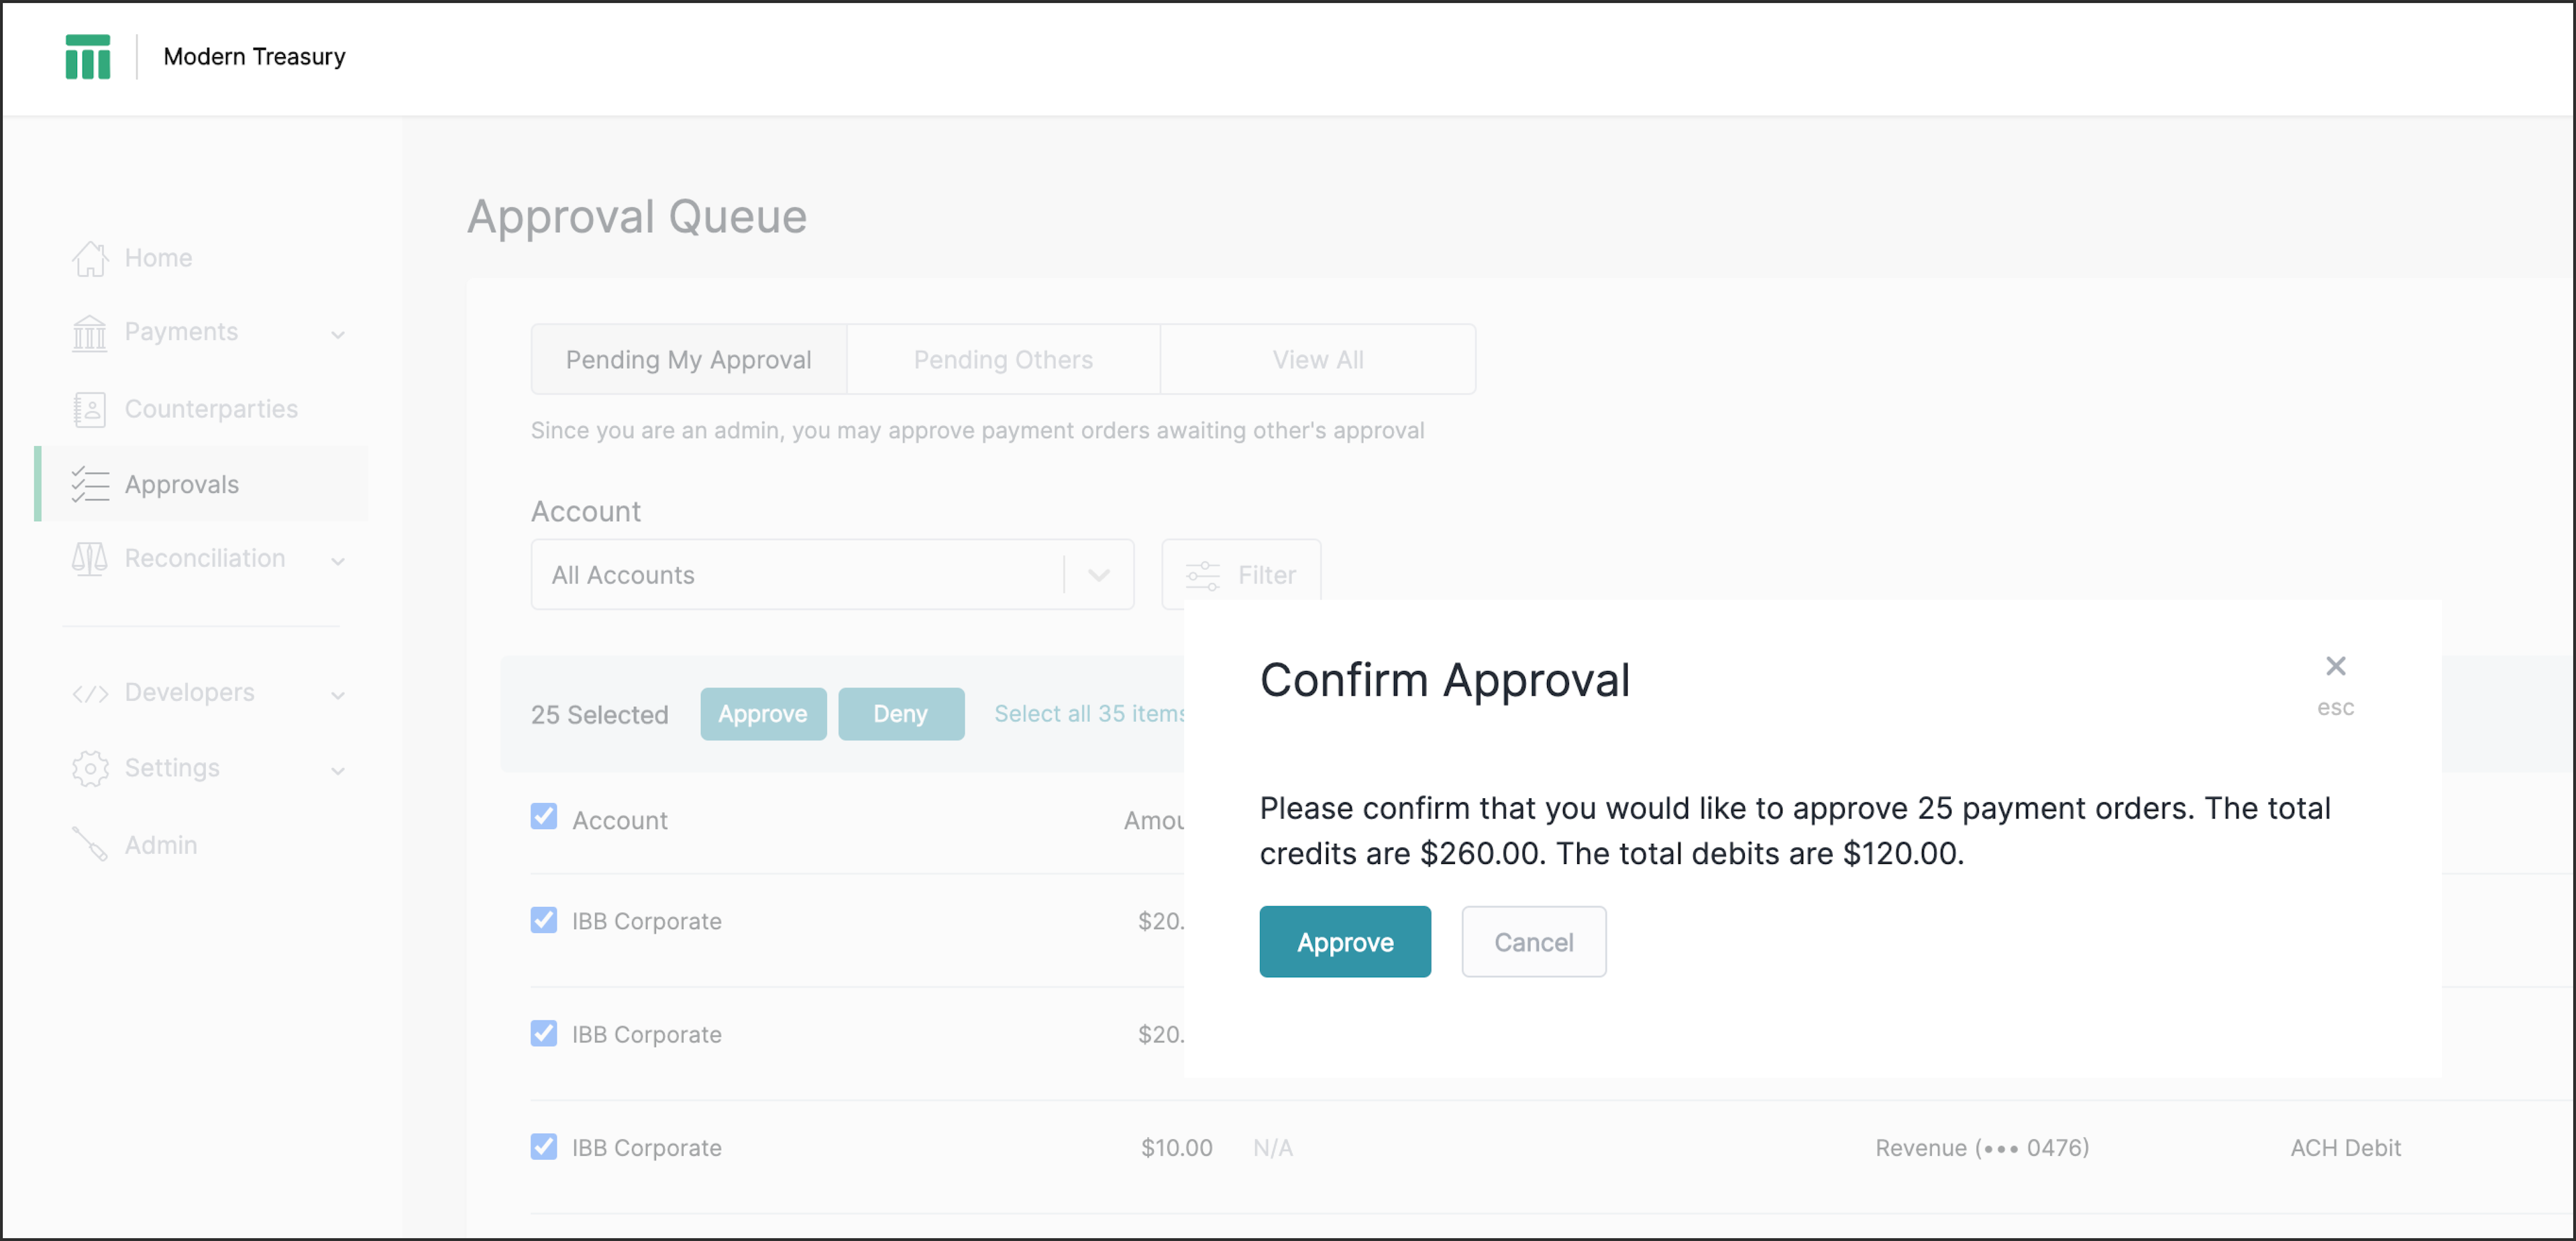 Screen: Approval Queue - Confirm Approval